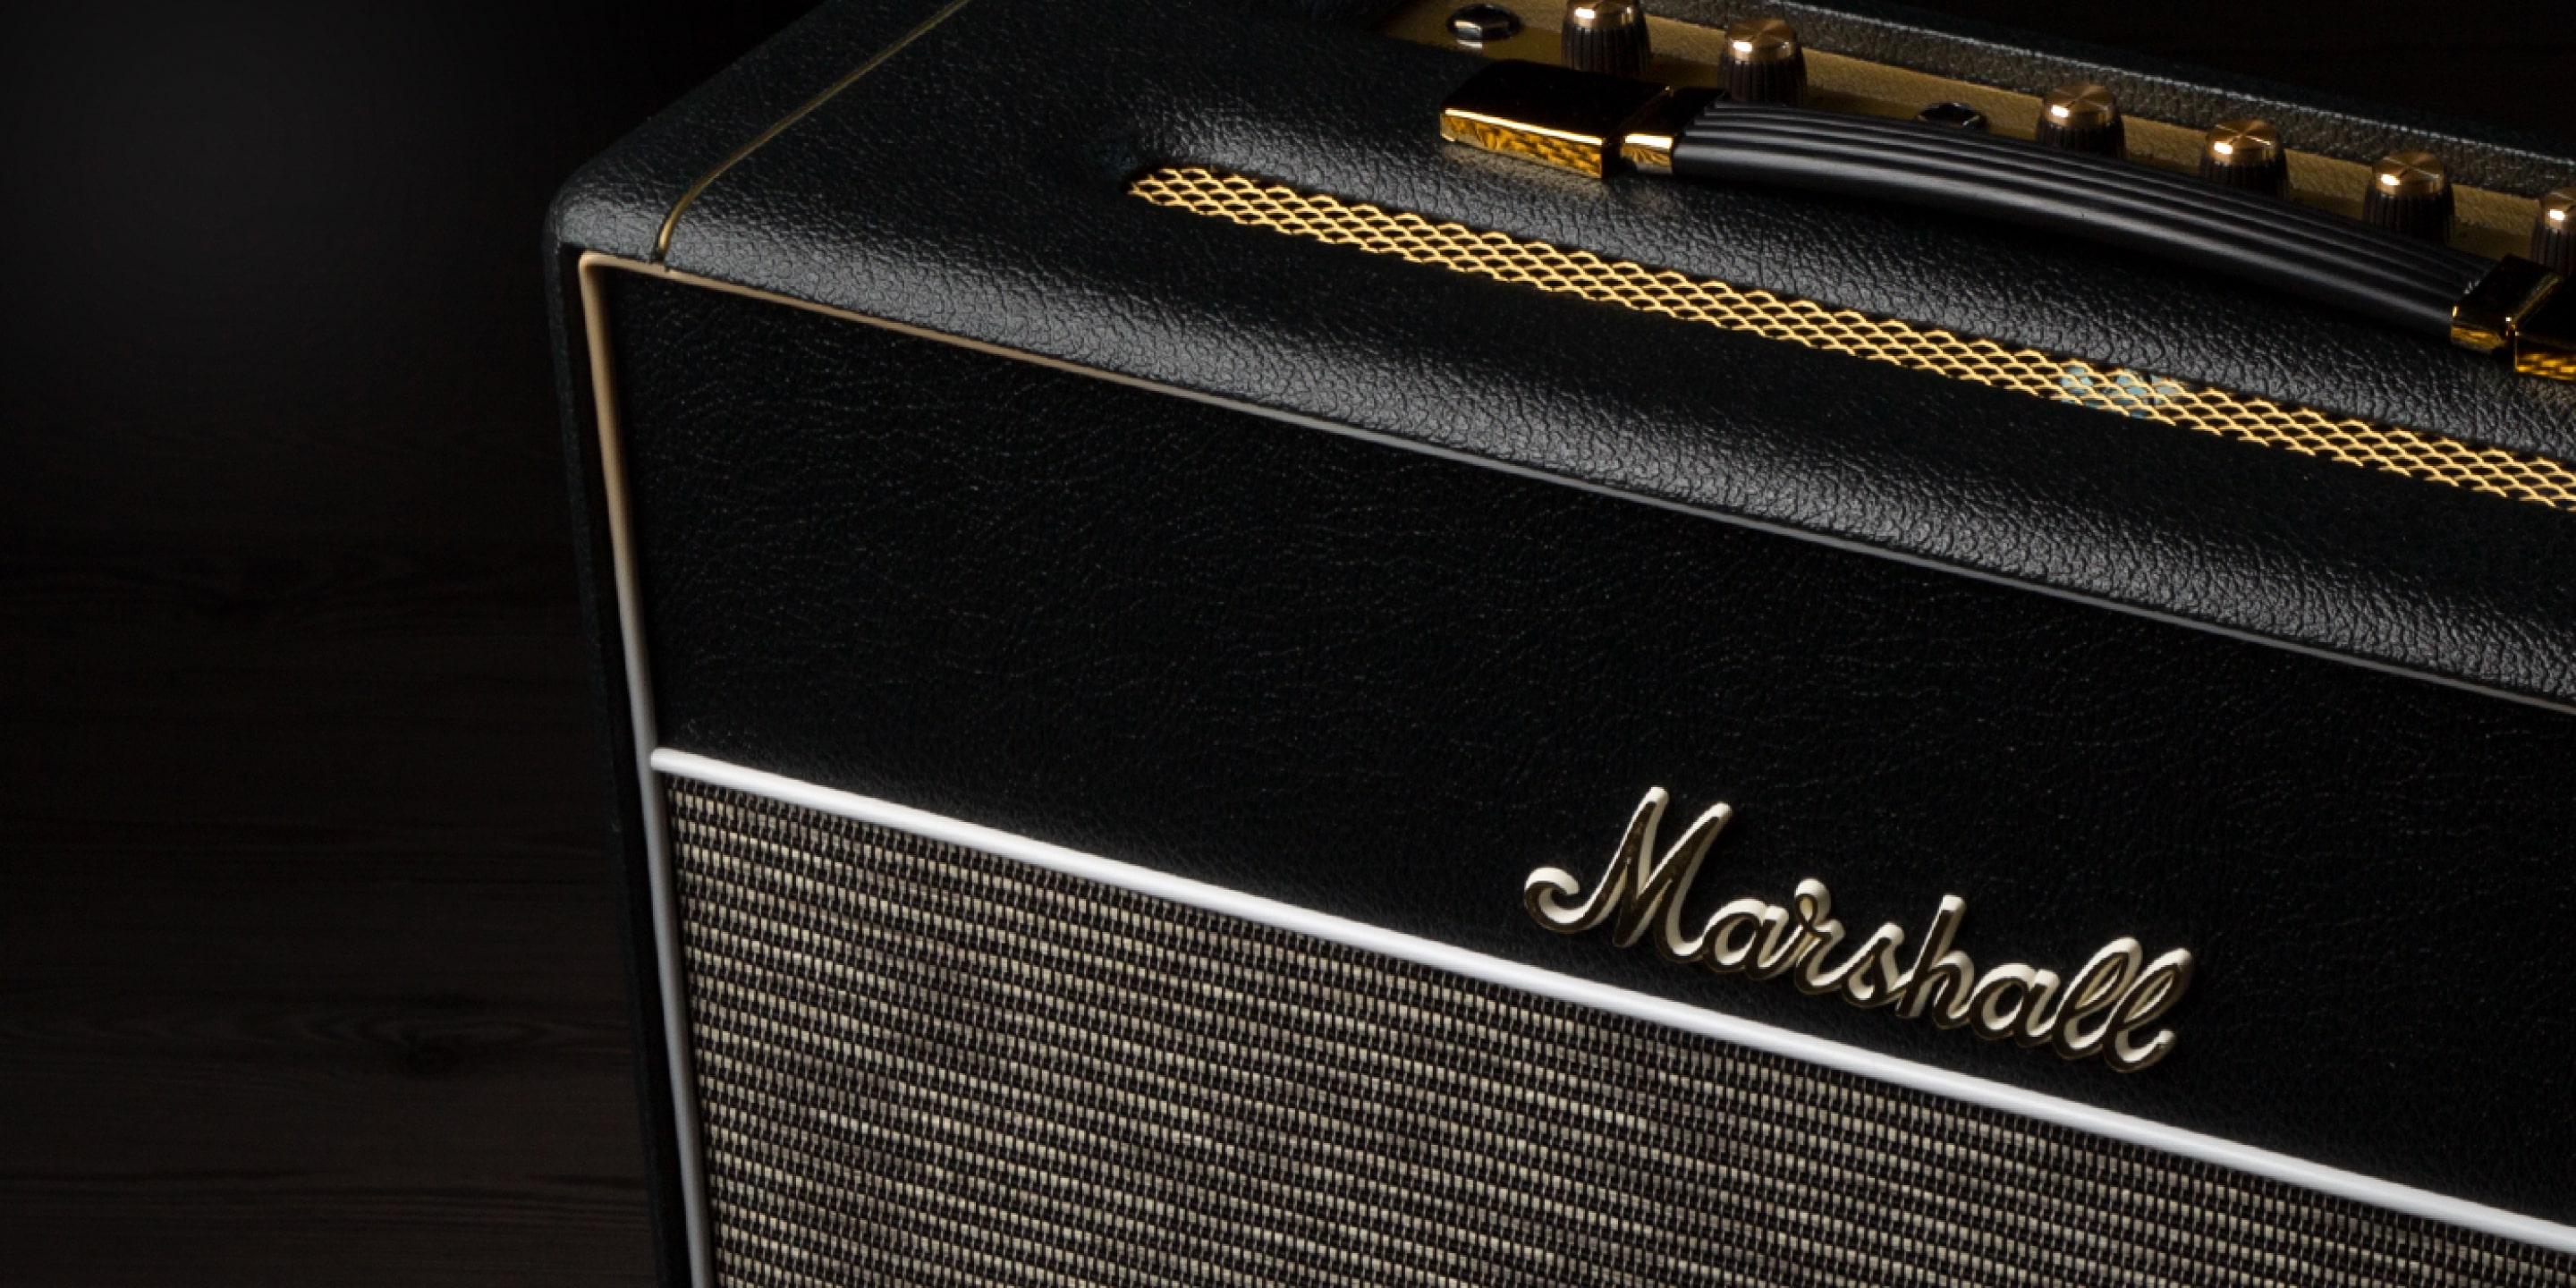 Focus on the control knobs and logo of the Marshall Black and Gold Handwired Amplifier.